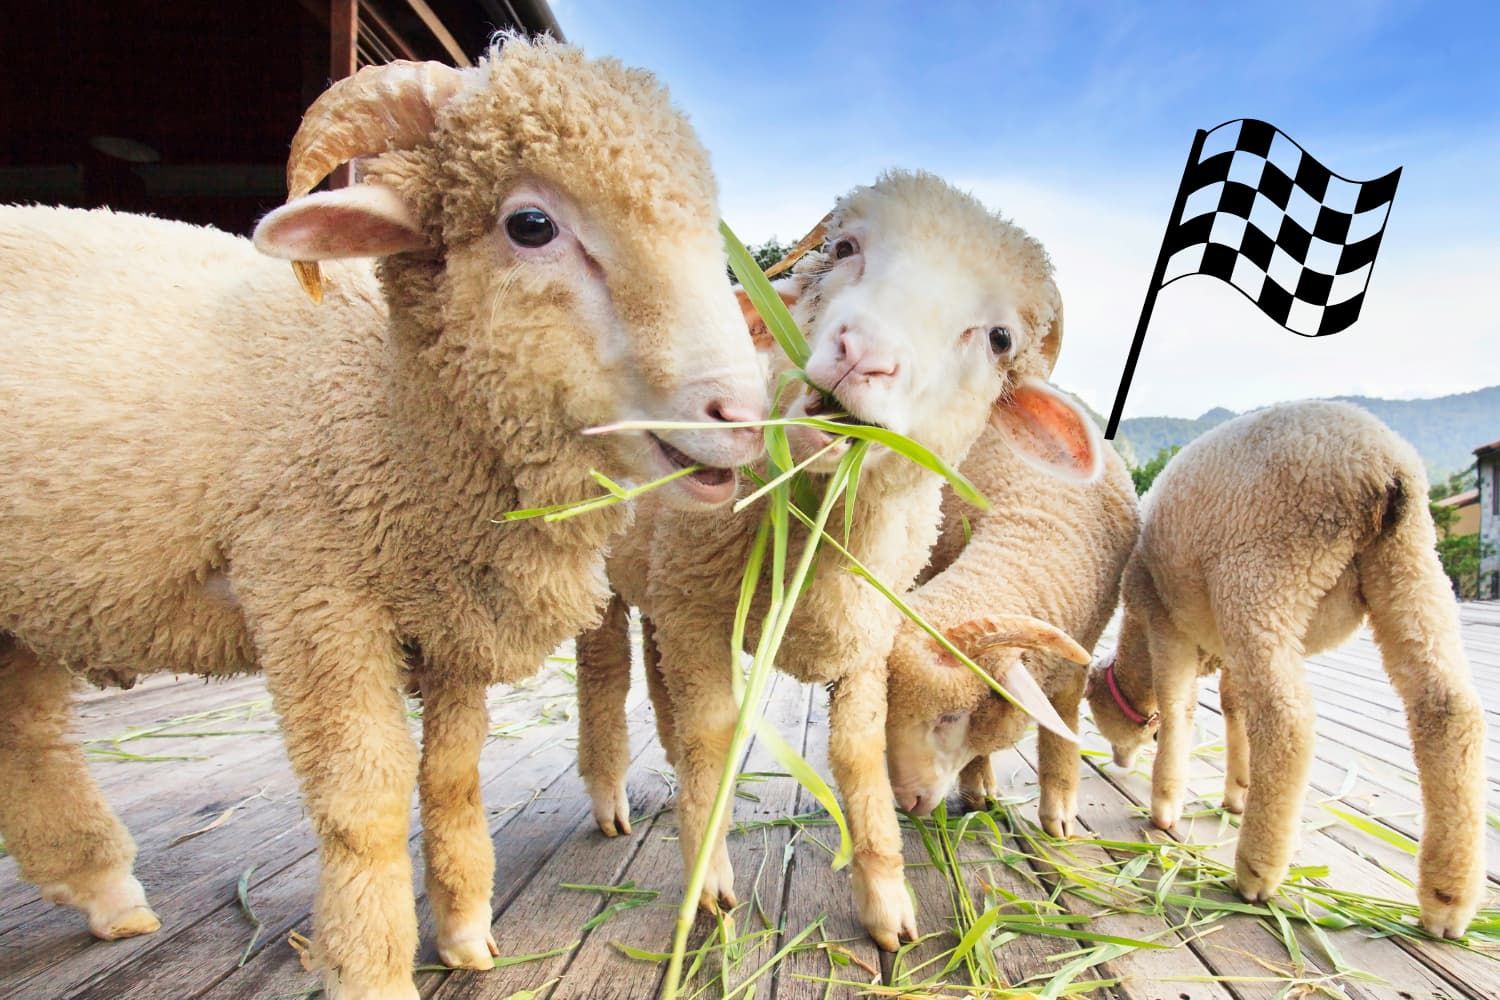 Game%20-%20OT%20Psalm%2023%20-%20The%20feed%20the%20sheep%20relay%20race-6bb58723 Animals